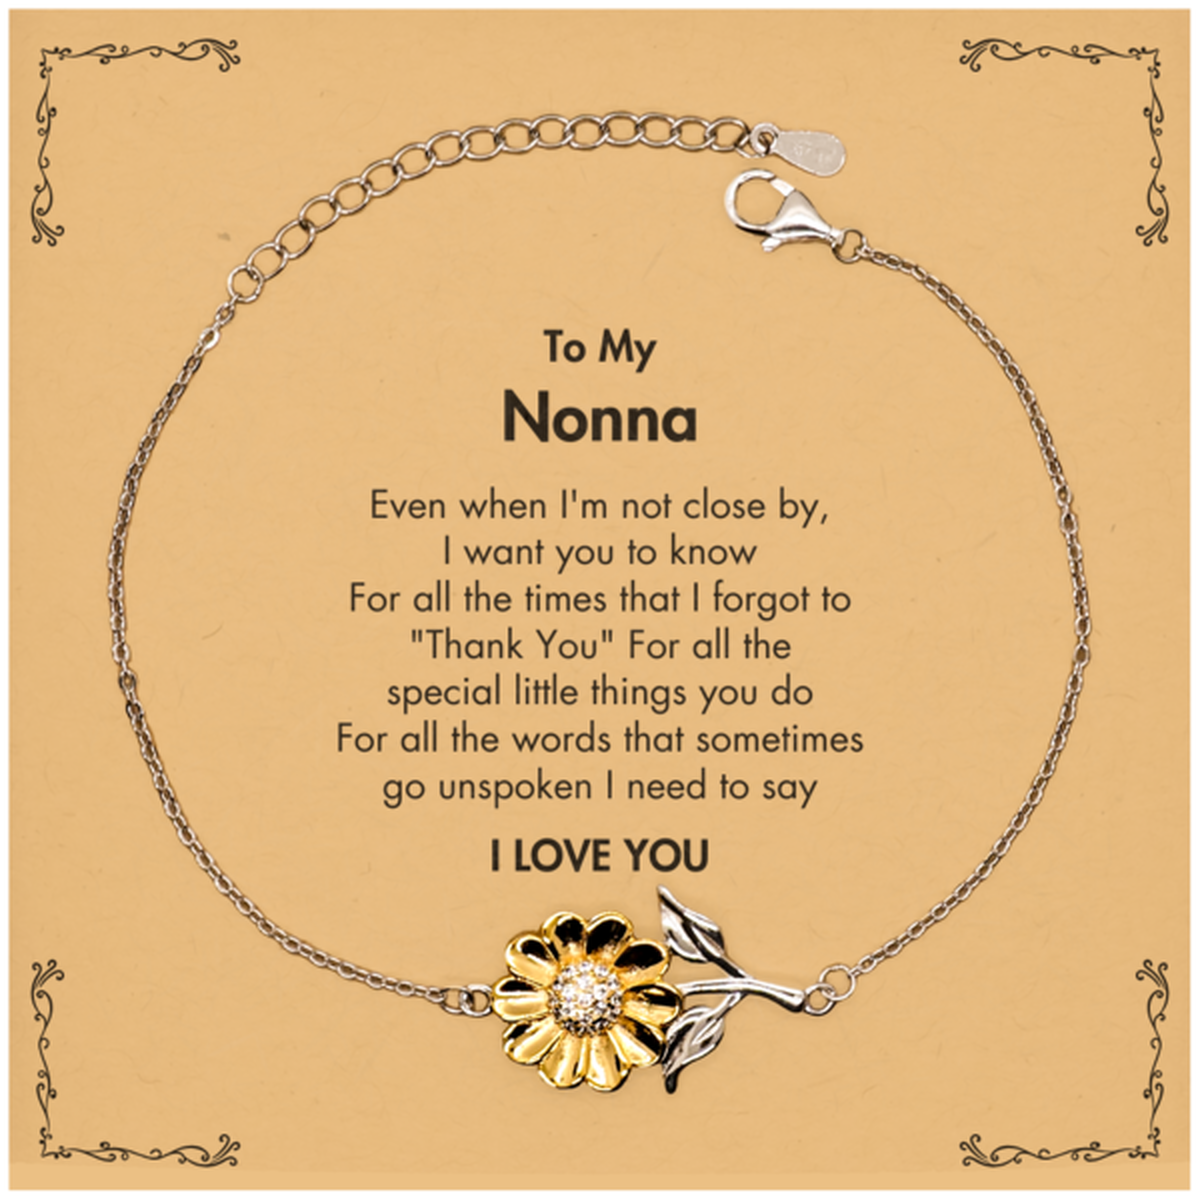 Thank You Gifts for Nonna, Keepsake Sunflower Bracelet Gifts for Nonna Birthday Mother's day Father's Day Nonna For all the words That sometimes go unspoken I need to say I LOVE YOU